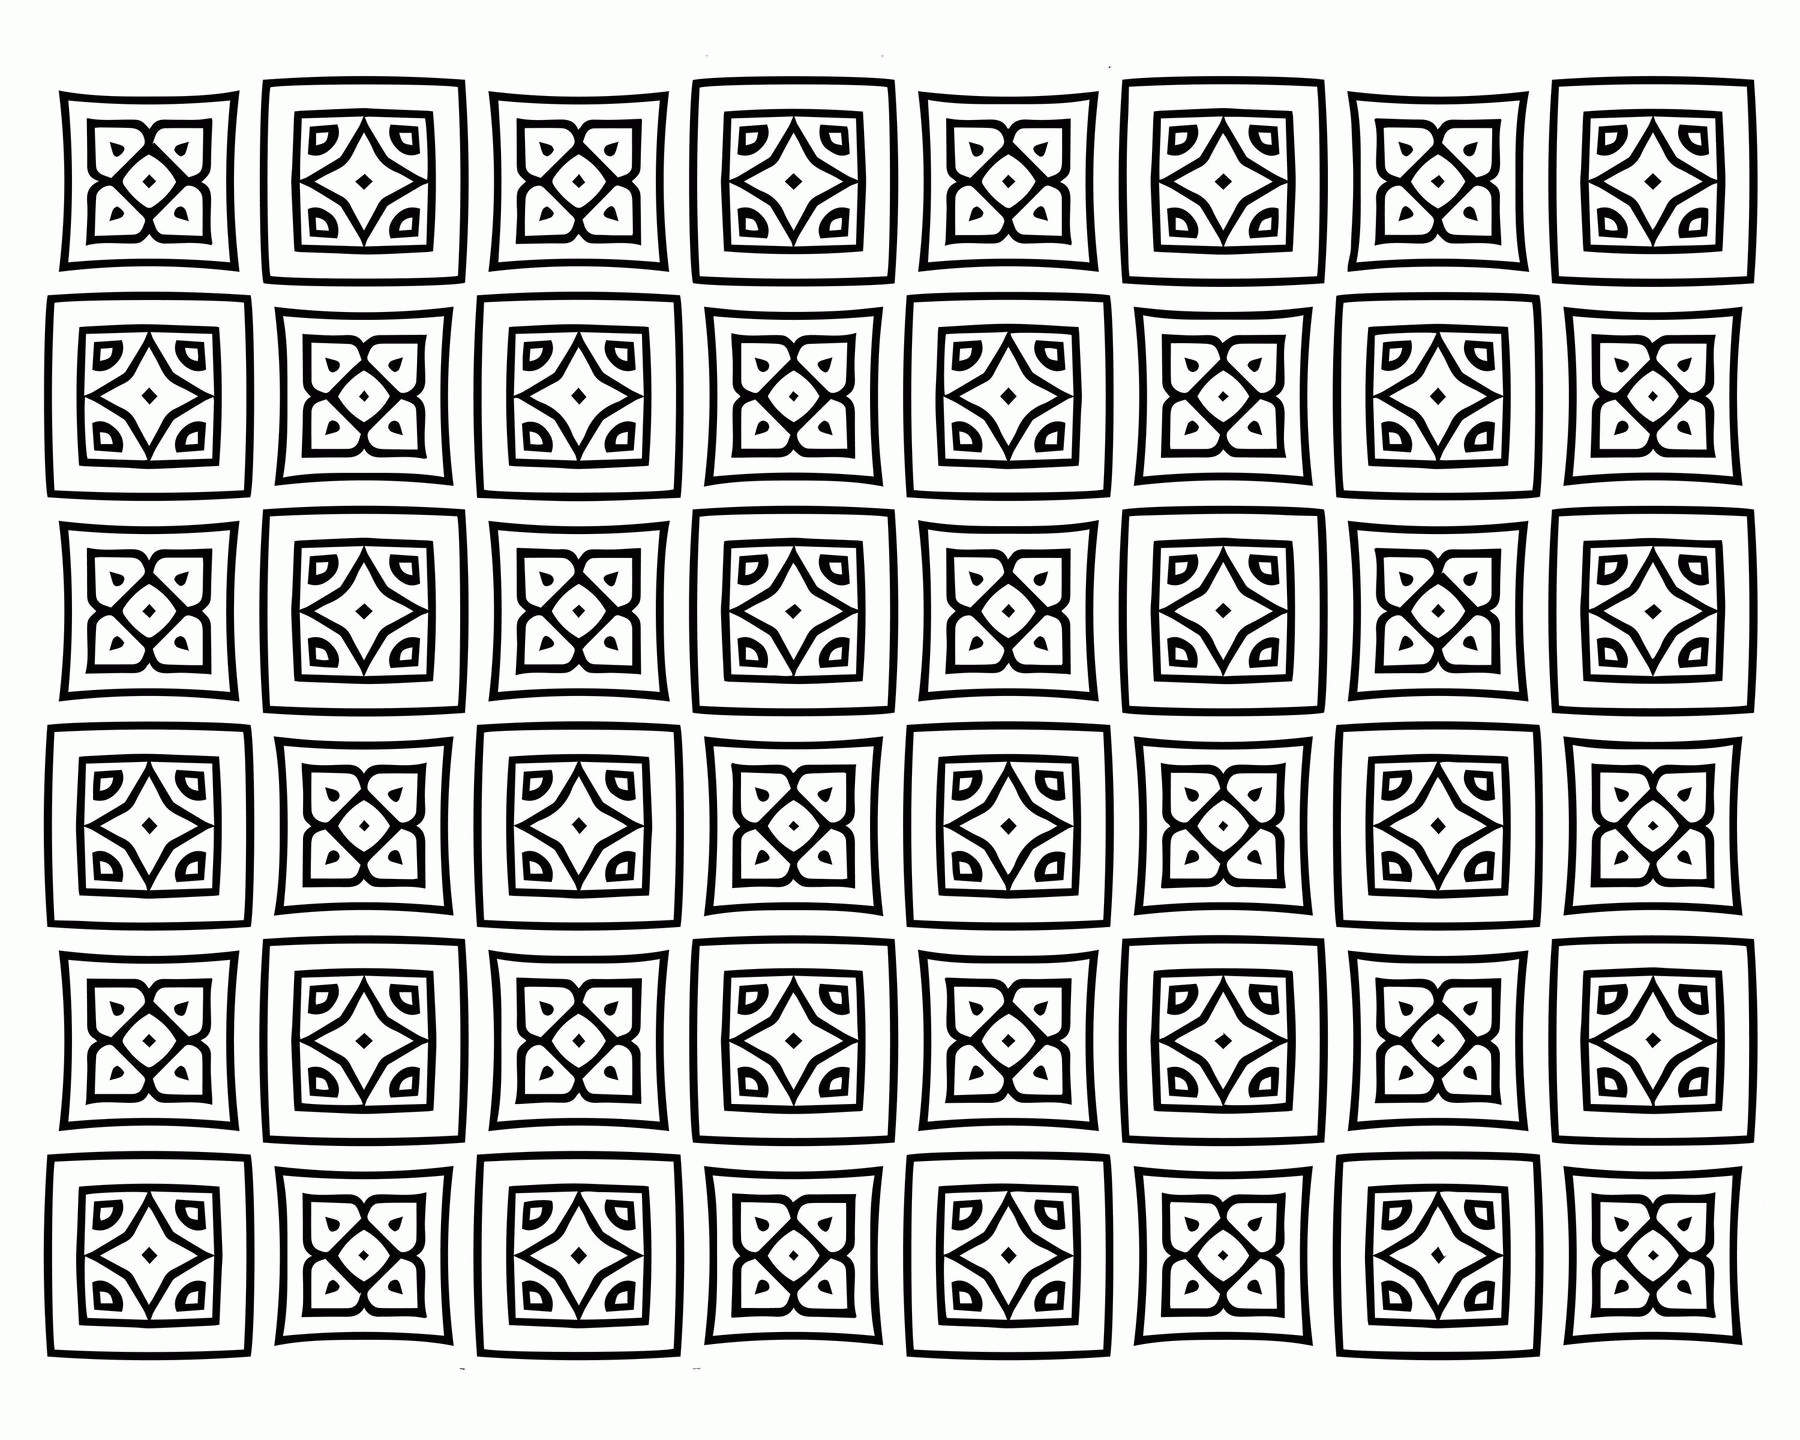 FREE Square Quilt Pattern Adult Coloring Page